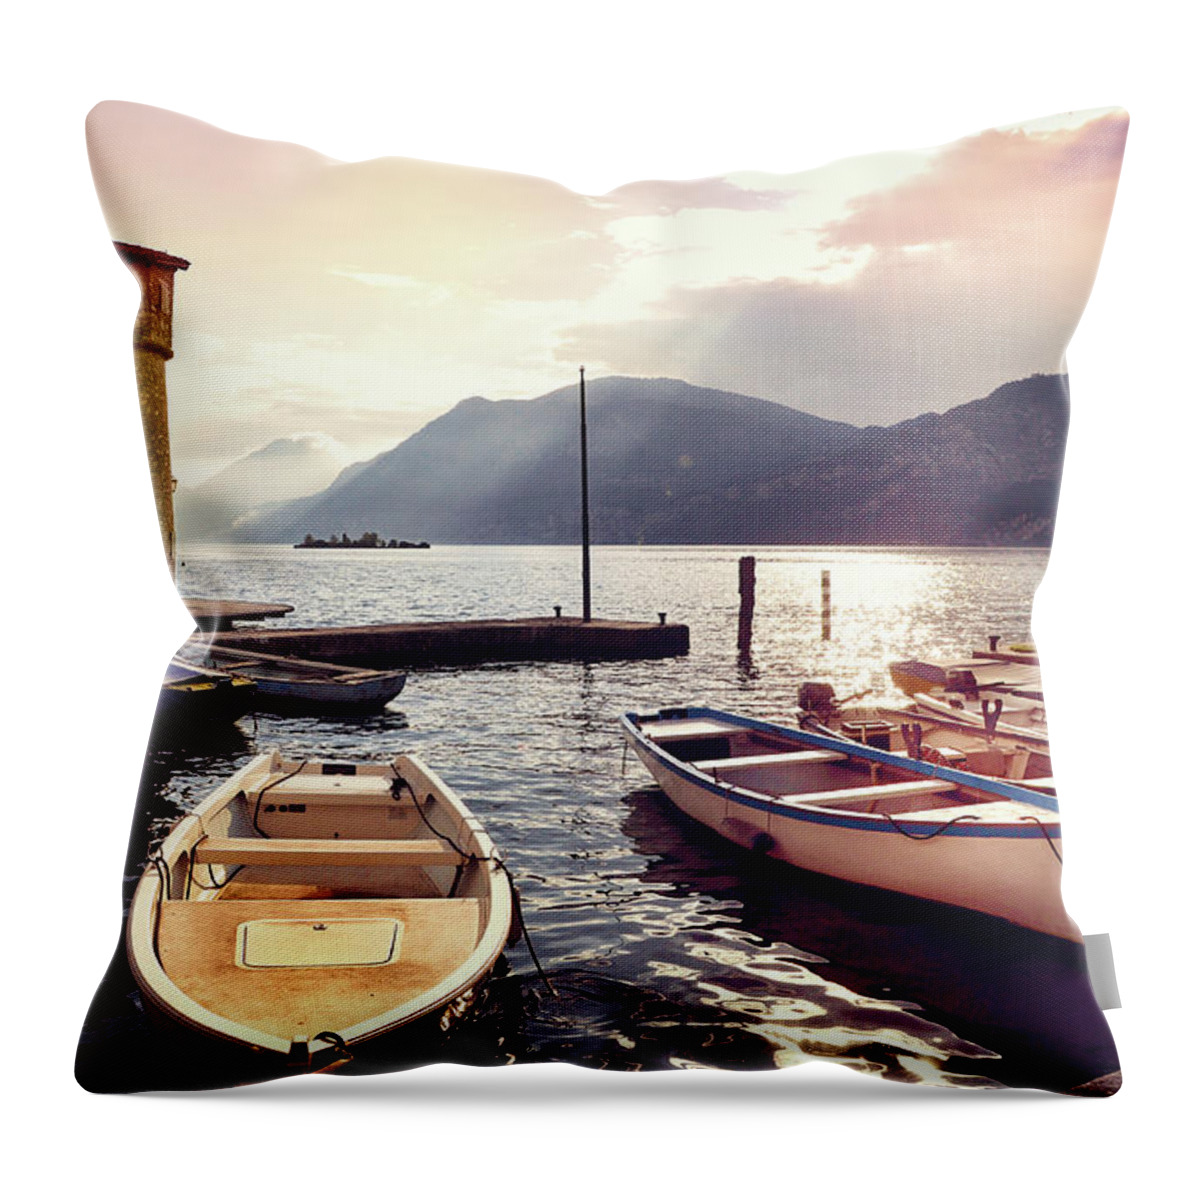 Scenics Throw Pillow featuring the photograph Sonnenuntergang Am Gardasee by You Find Some Of My Photos On Getty Images.